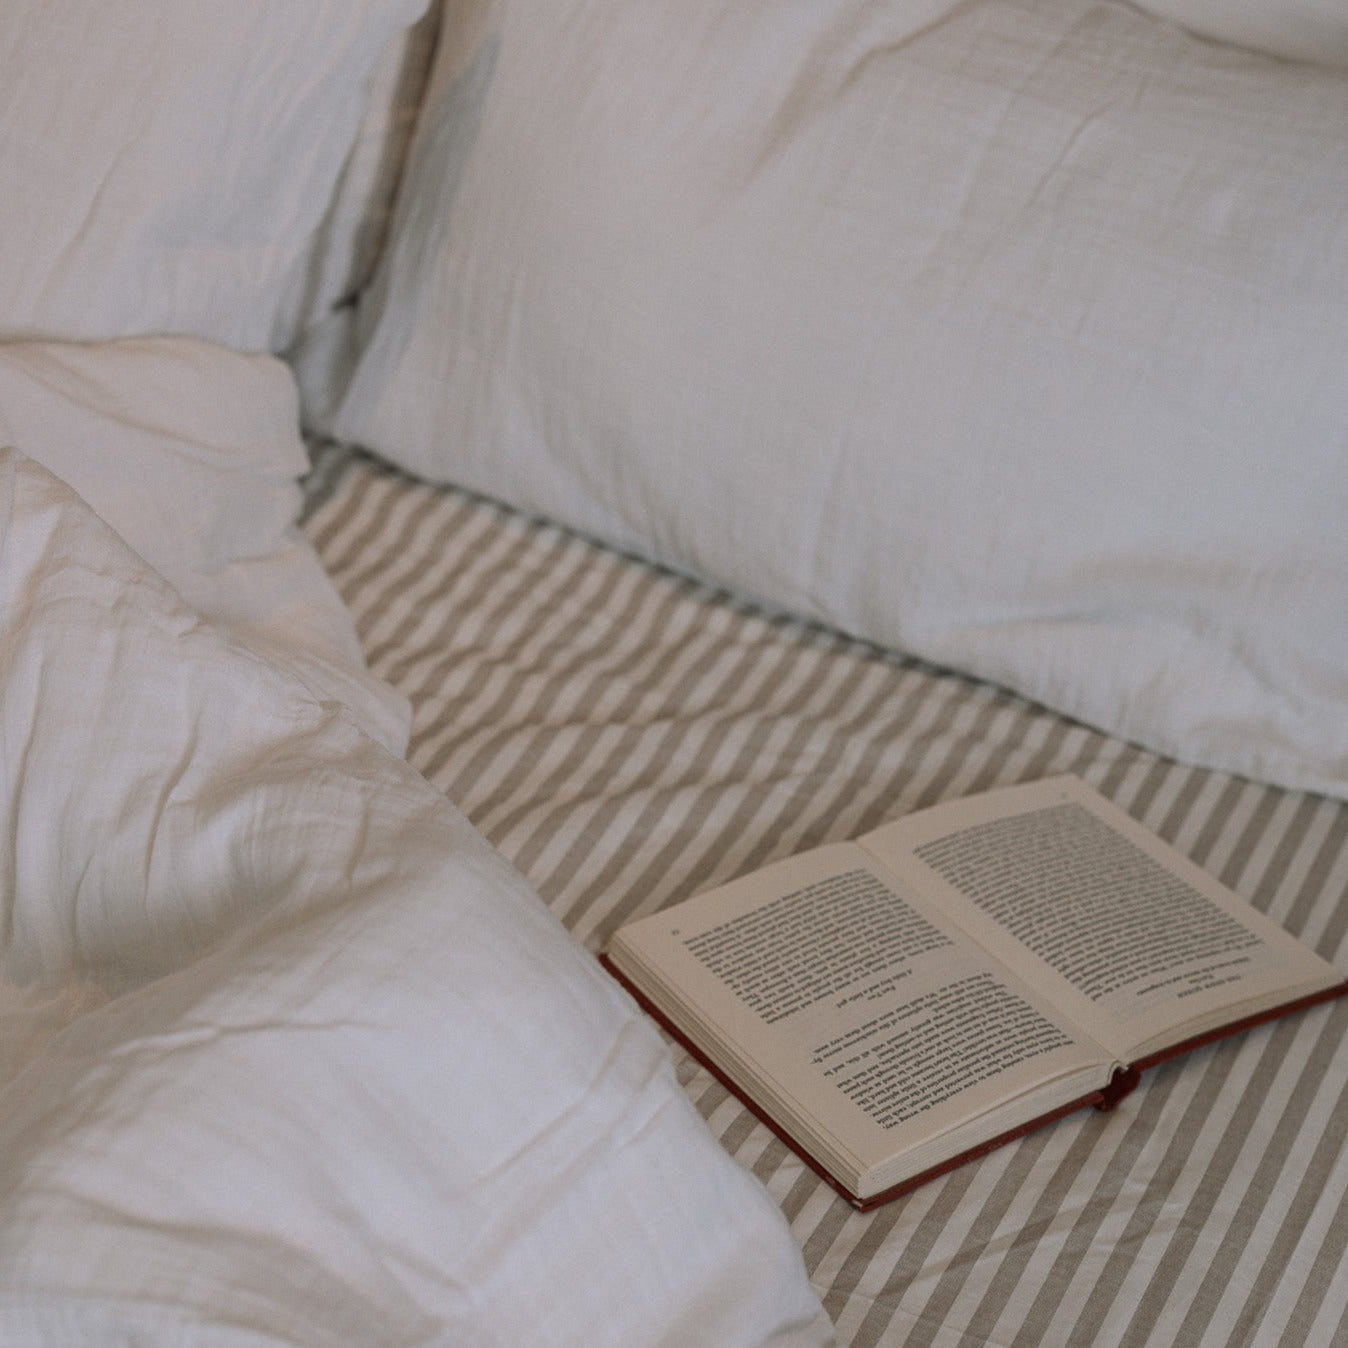 unmade white and striped bedding with an open book.